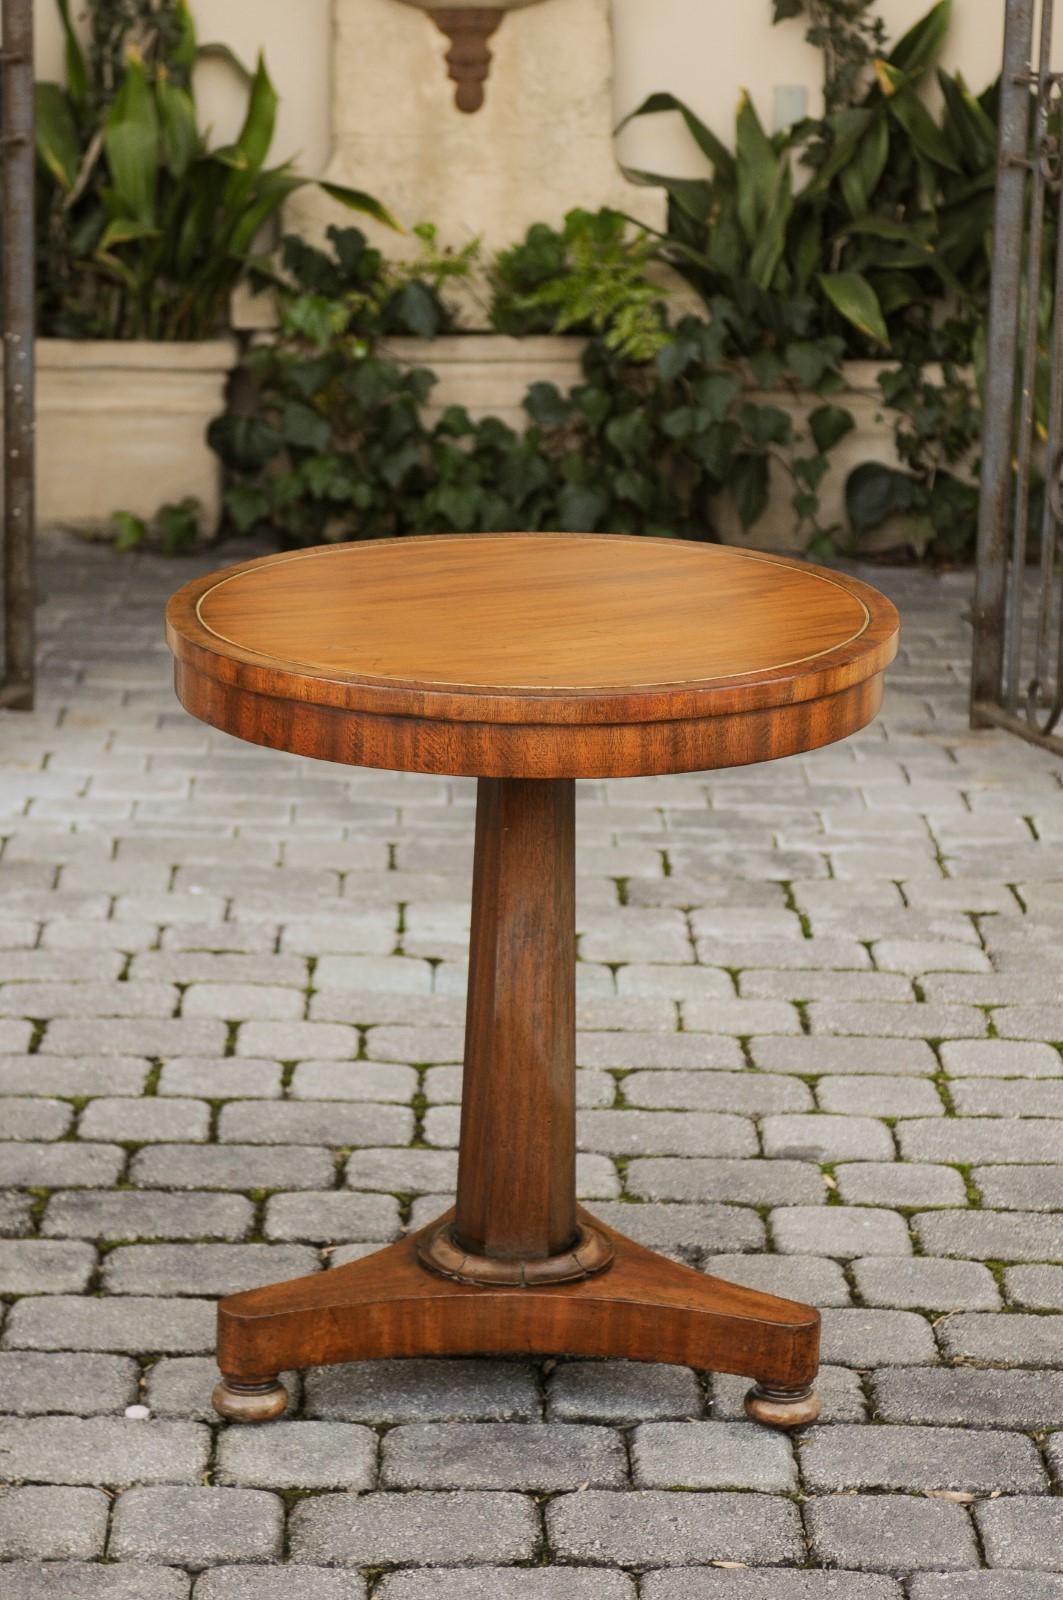 A French Second Empire period walnut guéridon side table from the mid-19th century, with circular top, tripod base and brass inlay. Born in France during the reign of France's last Emperor Napoleon III, this exquisite guéridon pedestal table